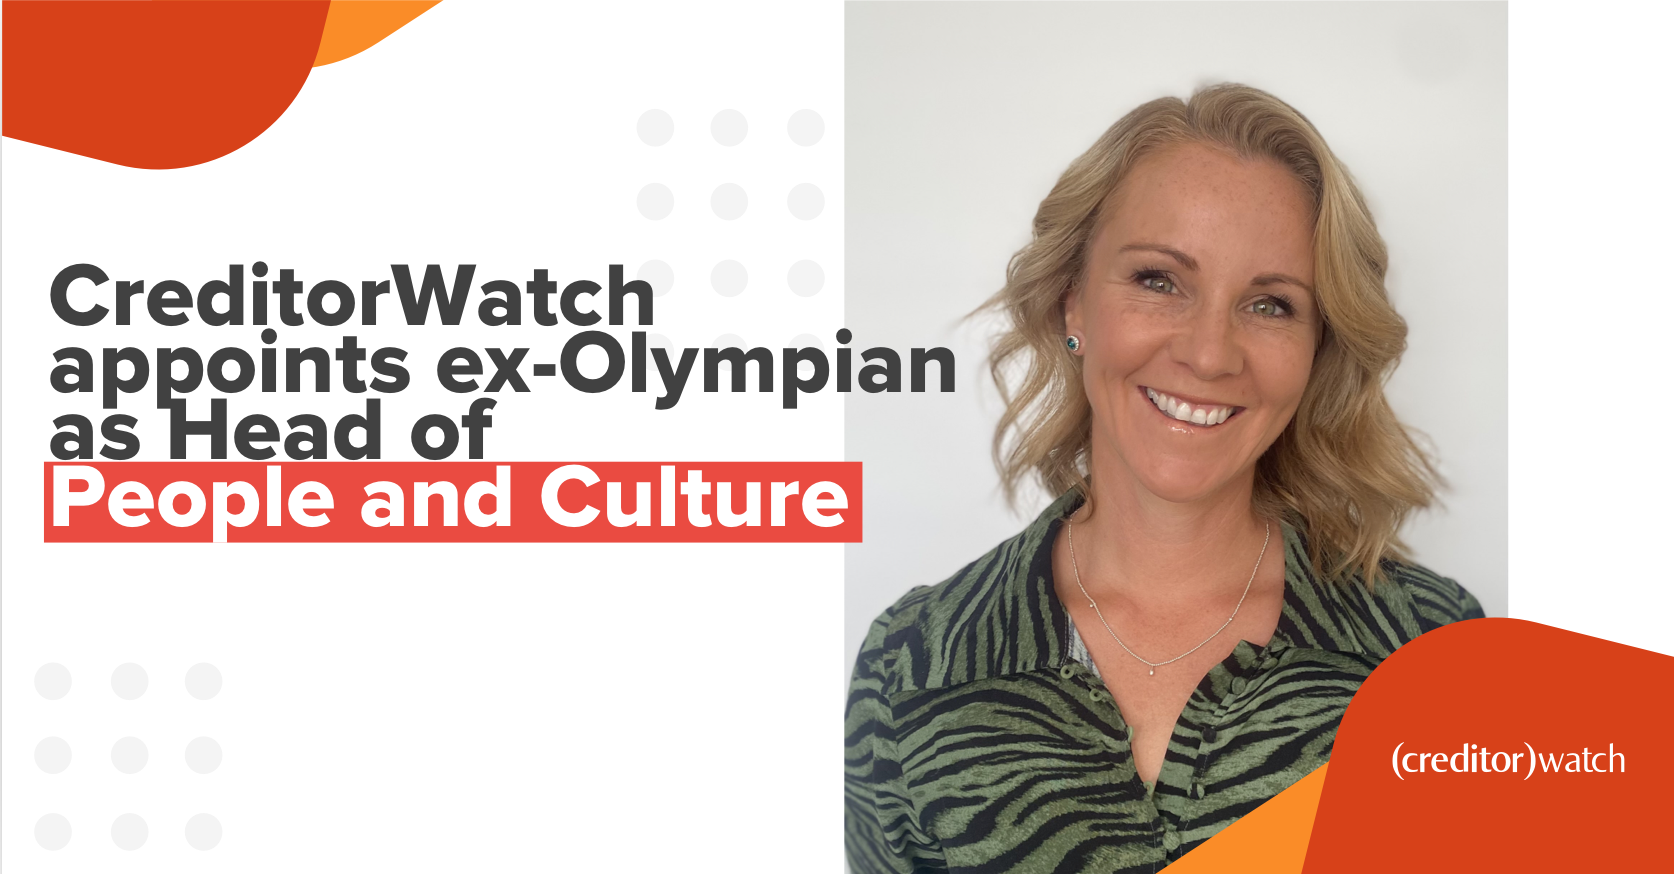 CreditorWatch appoints ex-Olympian as Head of people and culture